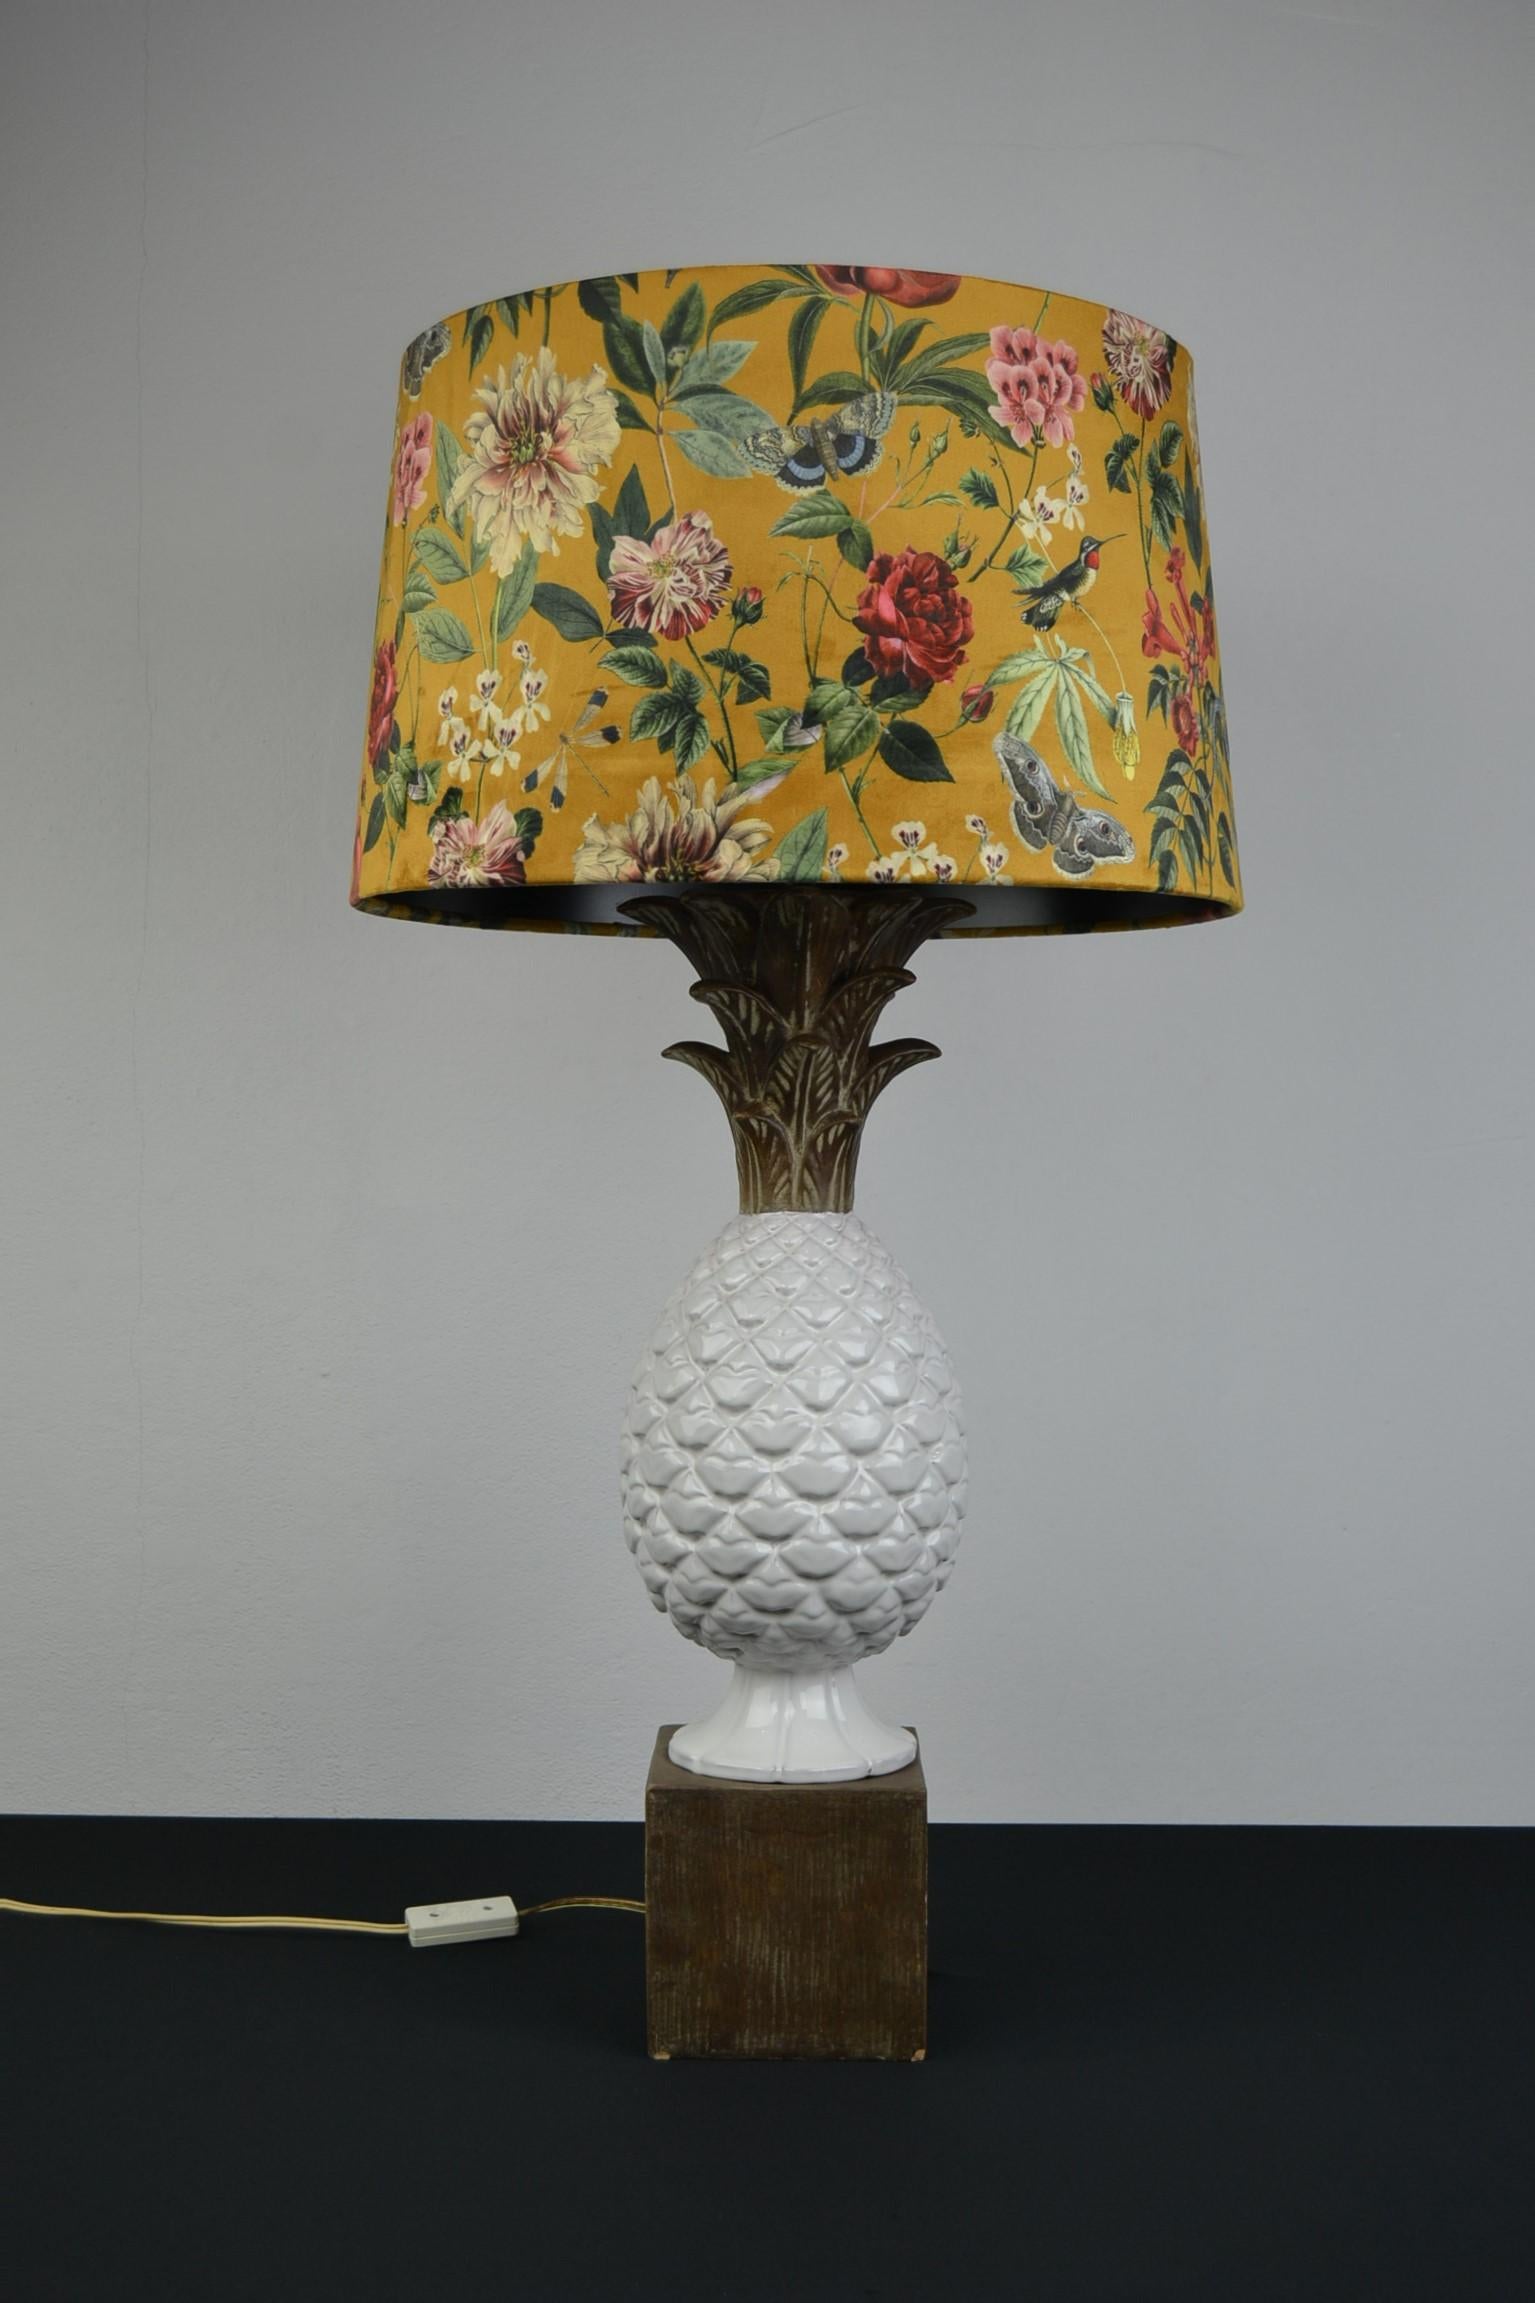 Zaccagnini Ceramic Pineapple Table Lamp, Italy, 1960s For Sale 14